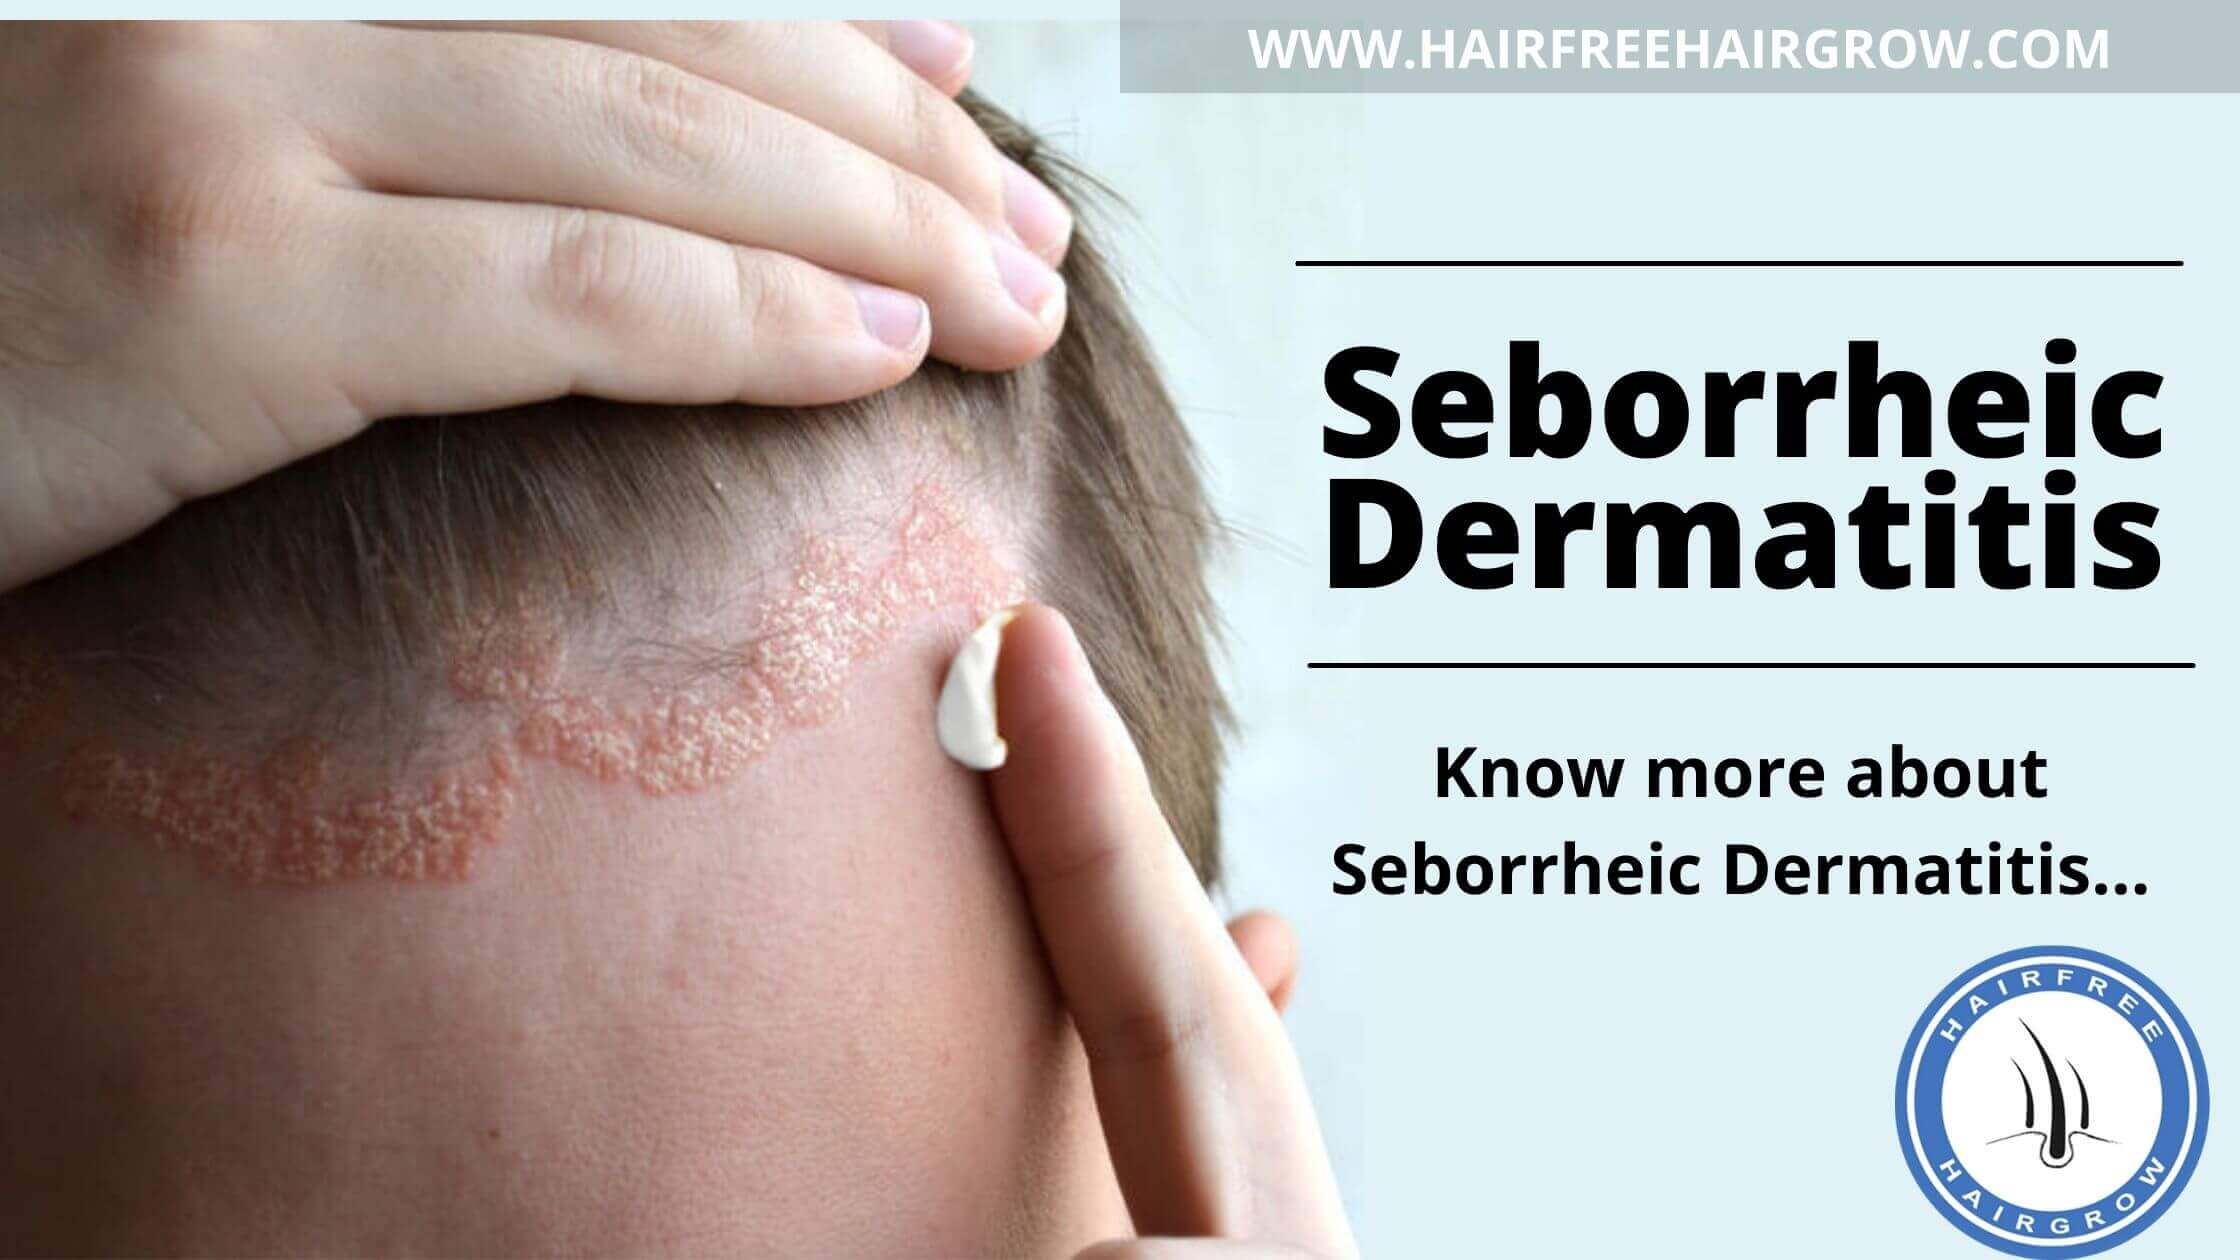 a man applying cream on the infected area from the hair loss condition called seborrheic dermatitis